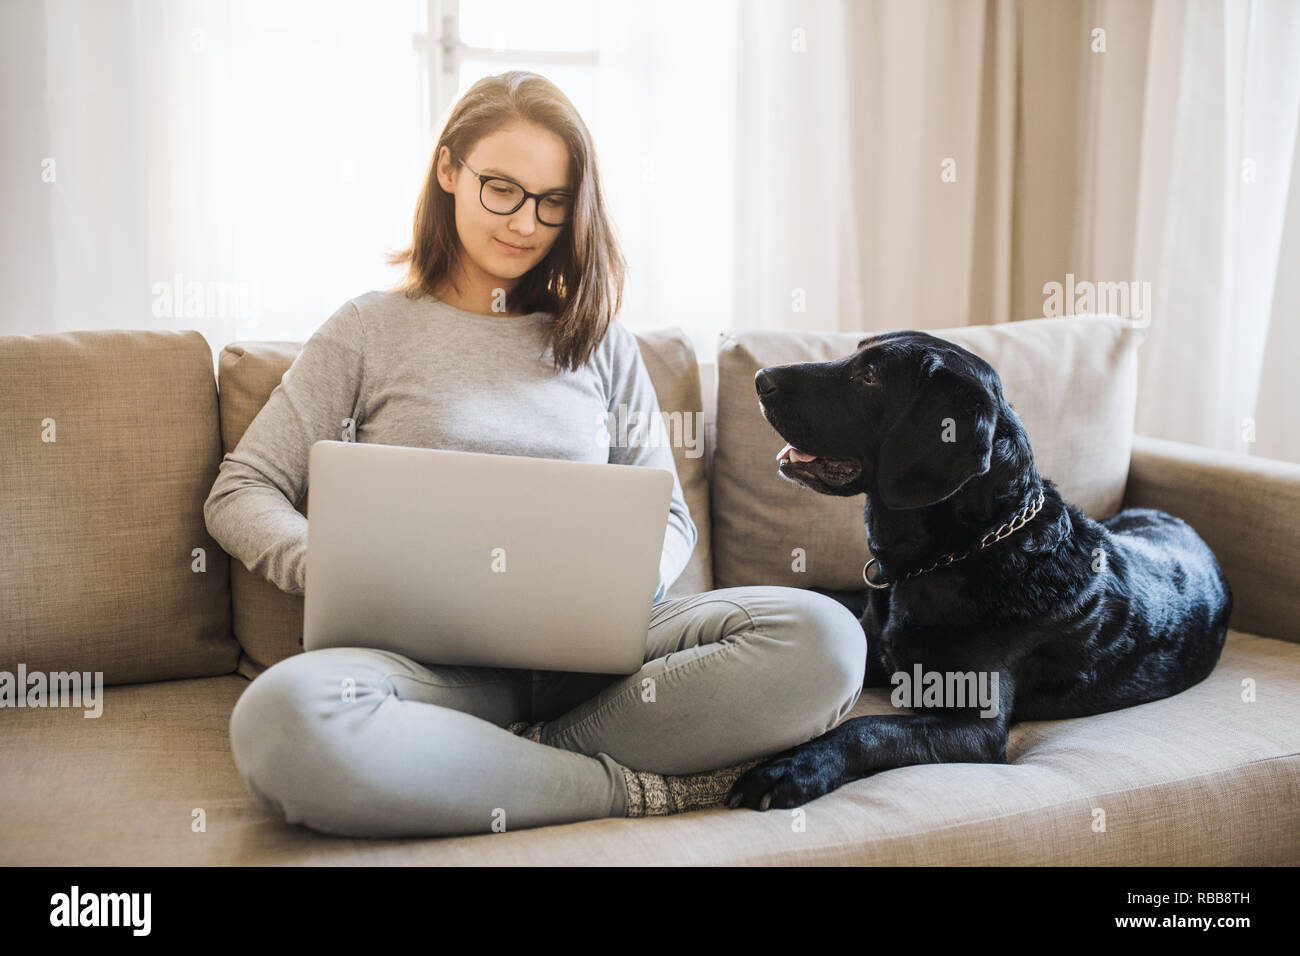 Teenage girl with a dog sitting on a sofa indoors, working on a laptop. Stock Photo